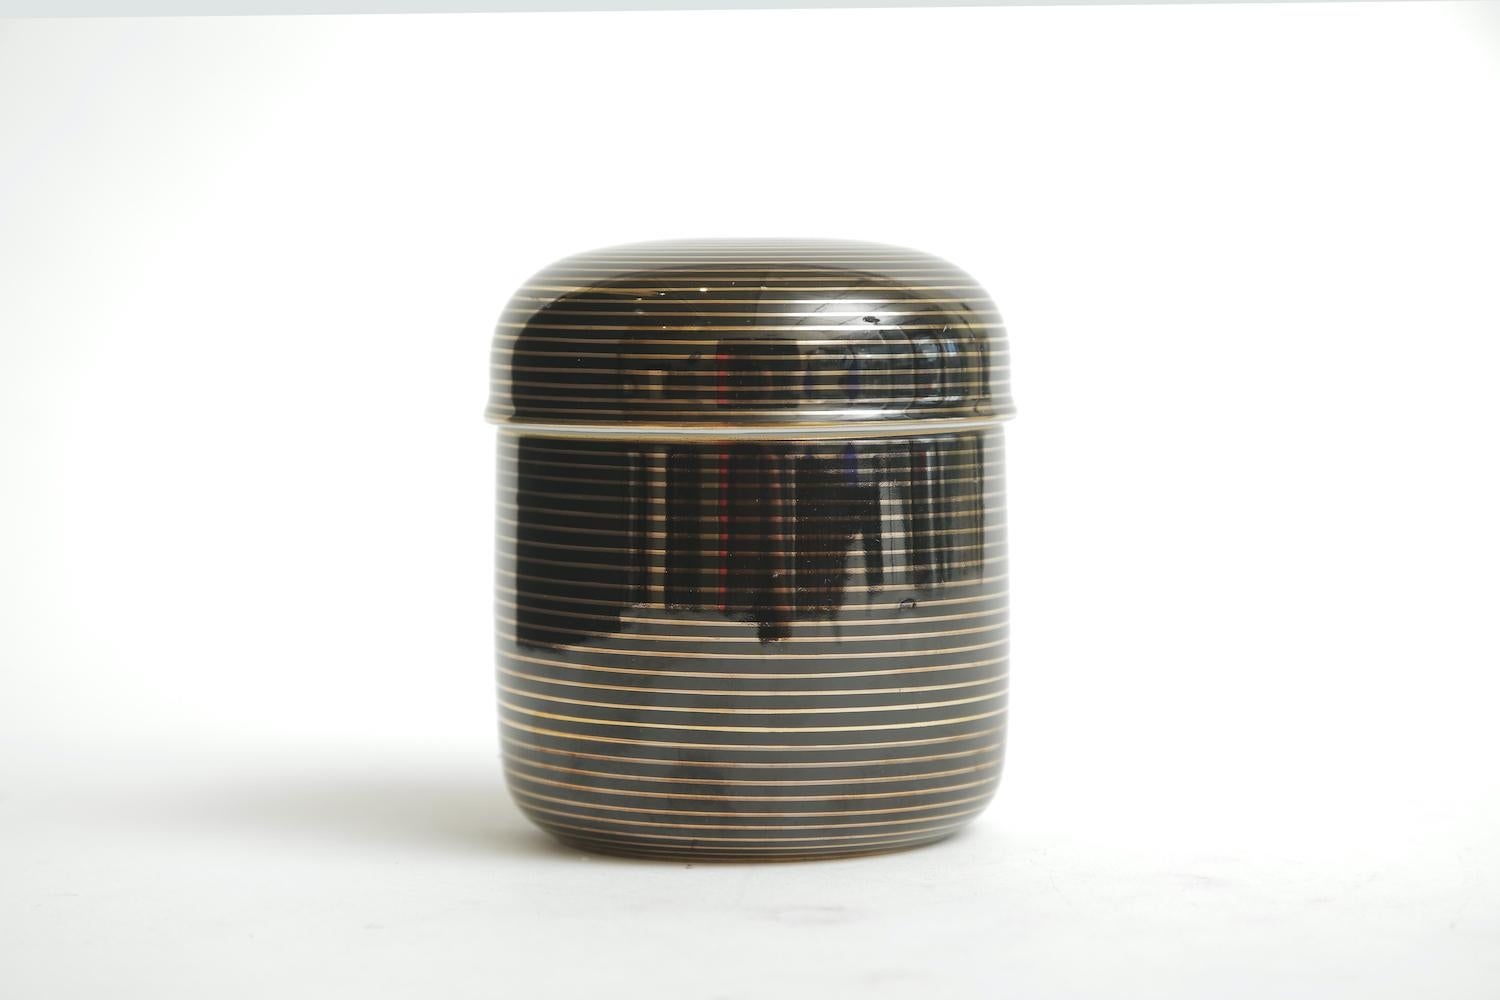 This handsome and rich looking porcelain box has their old label on it that says FF made in Japan. The white porcelain interior and the black and gold exterior with concentric lines and circles make for a great 2-part box. This is from the 1970s.